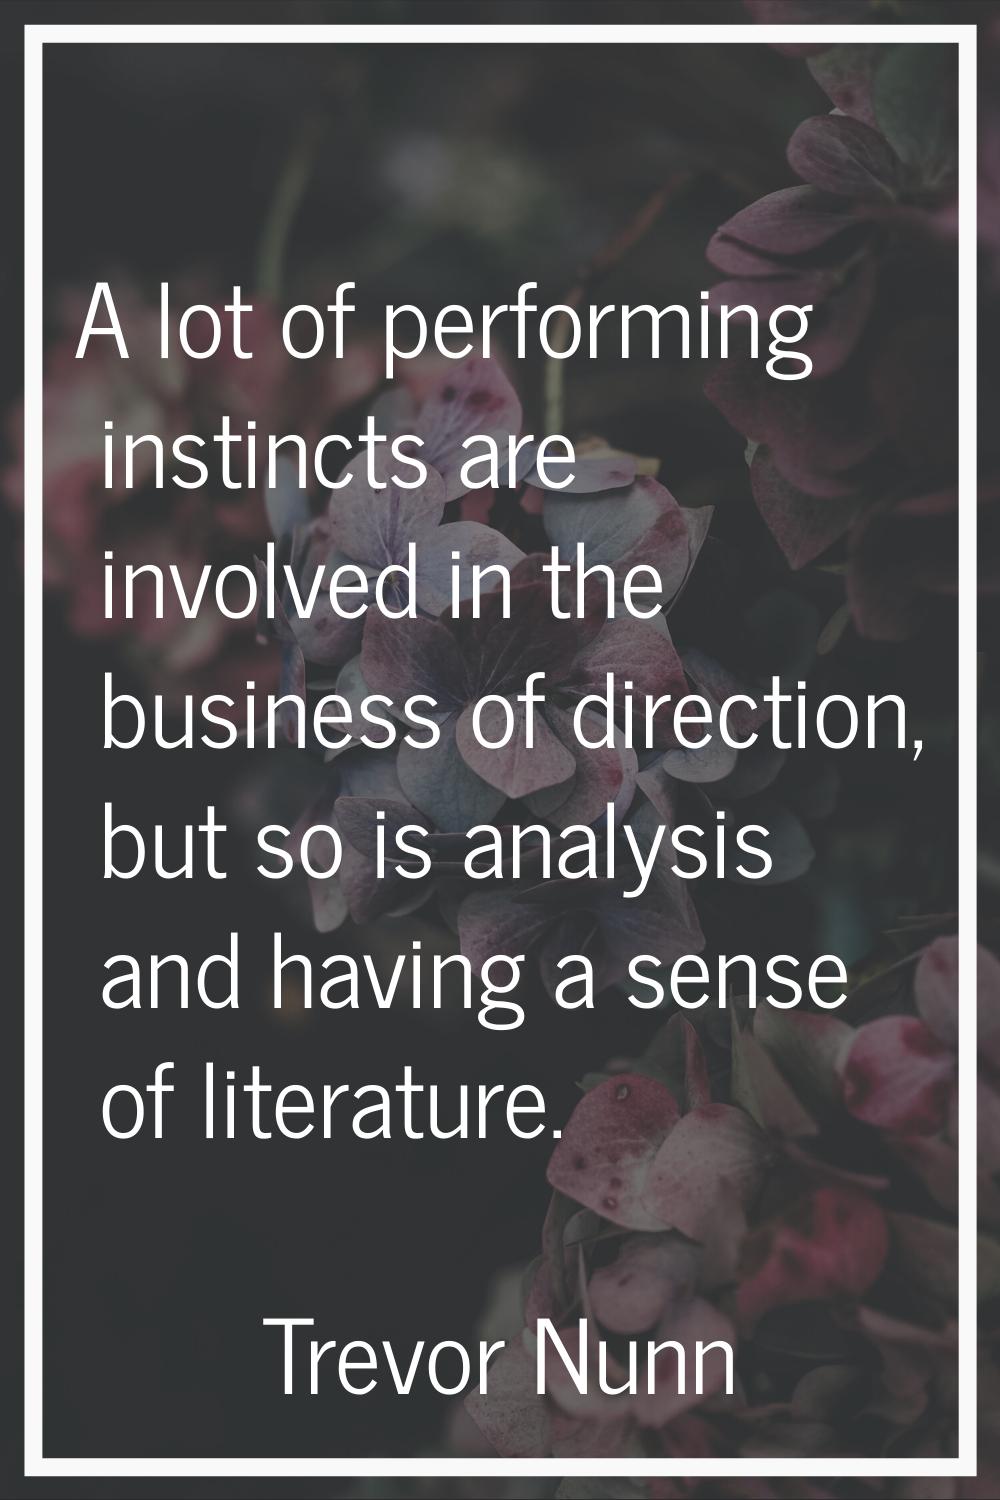 A lot of performing instincts are involved in the business of direction, but so is analysis and hav